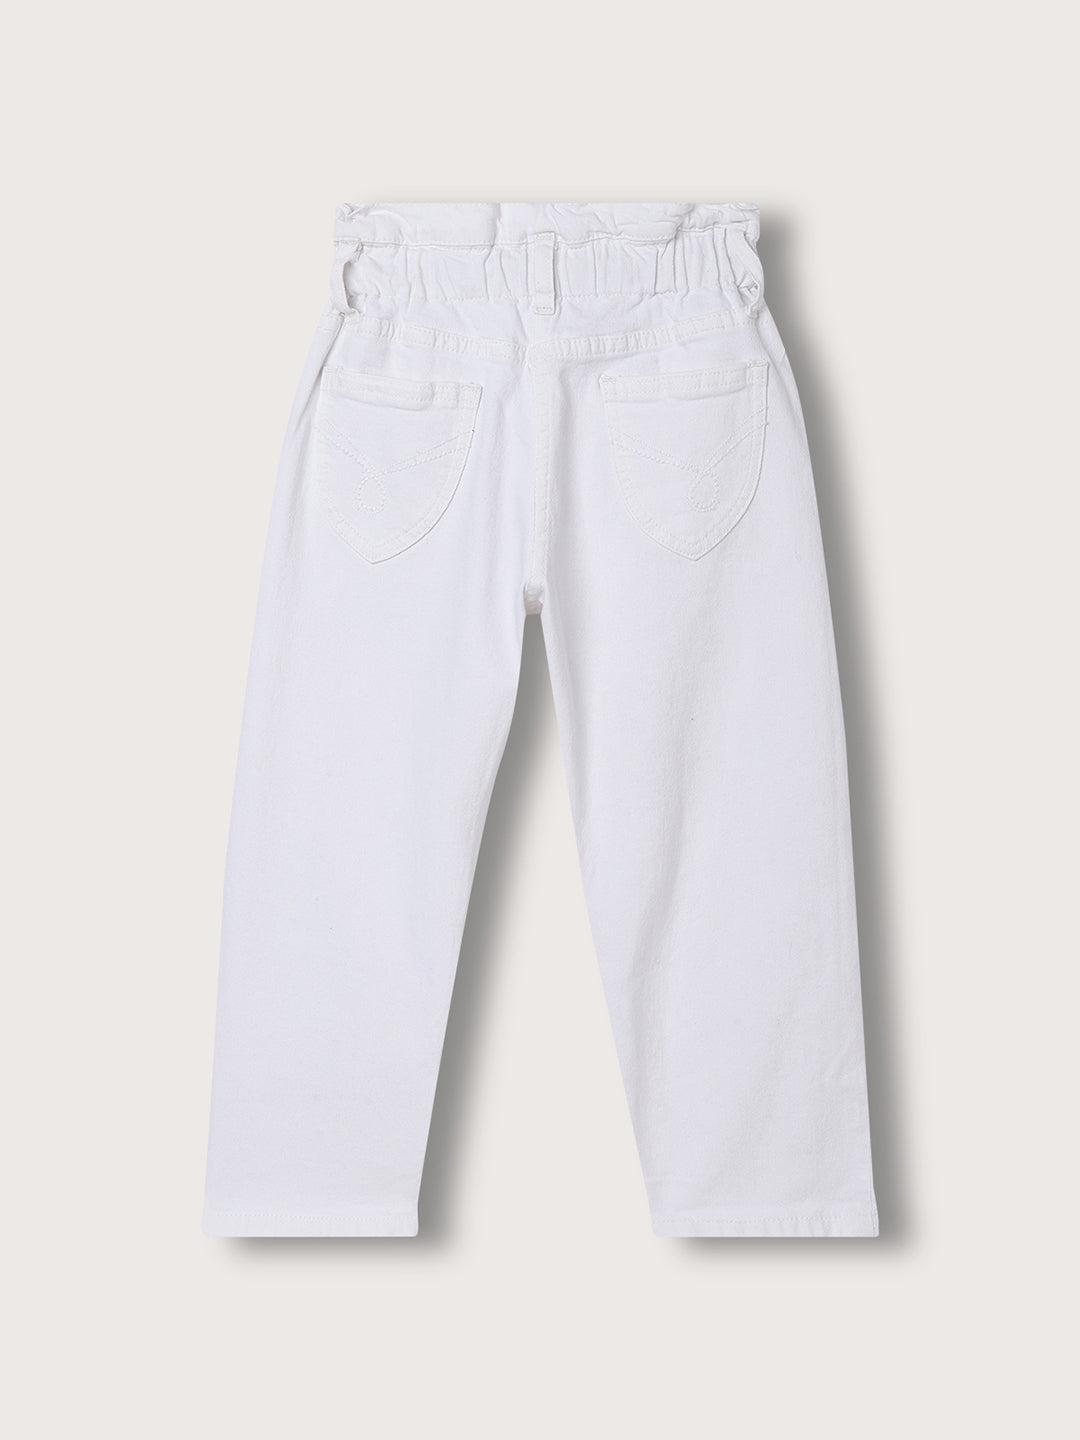 Buy Tales & Stories Kids White Cotton Jeans for Girls Clothing Online @  Tata CLiQ